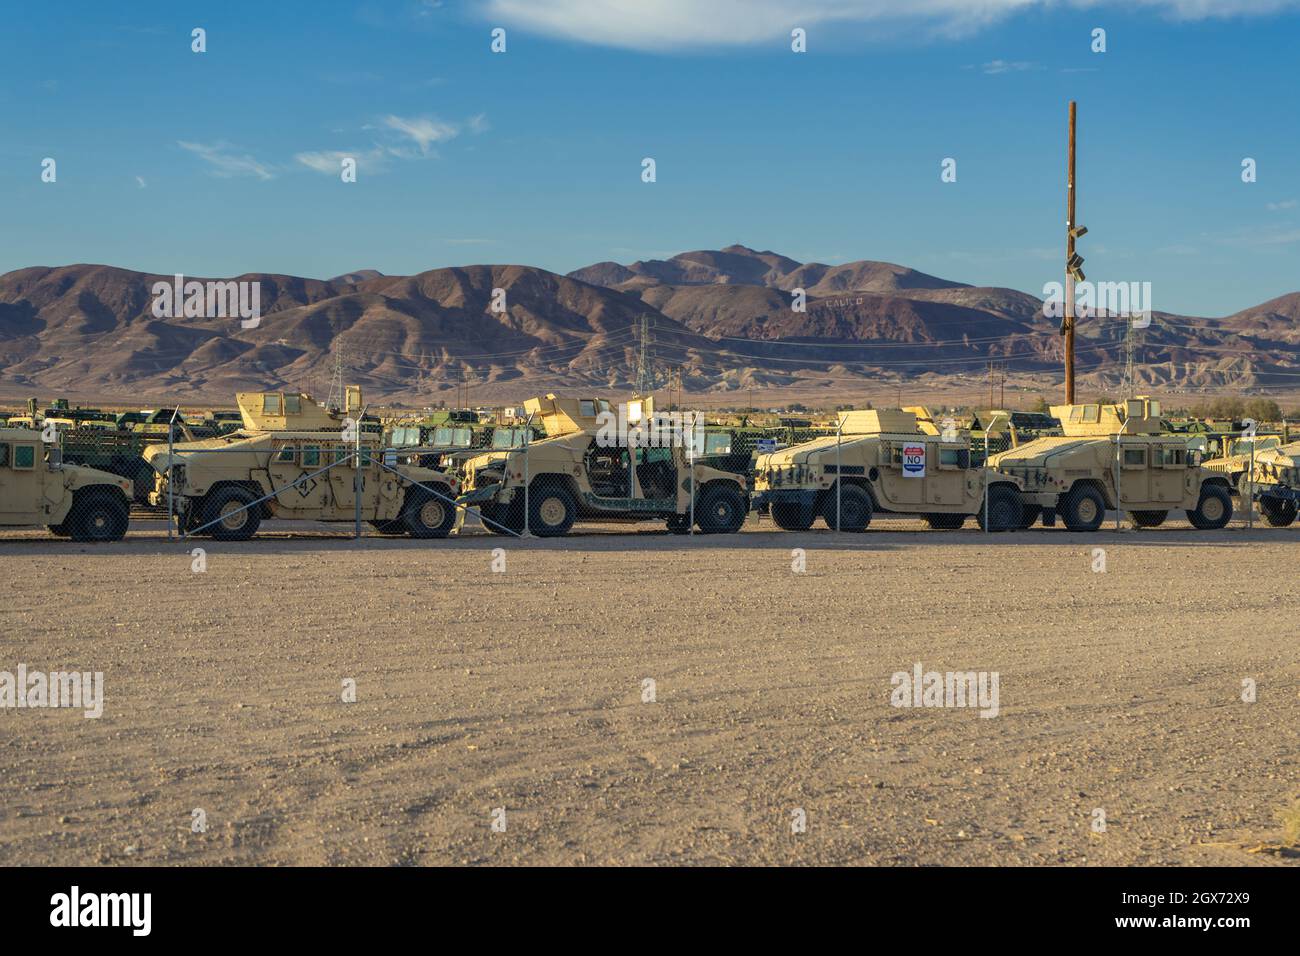 Yermo, CA, USA – July 2, 2021: Military humvee vehicles stored at an auction lot in The Mojave Desert in Yermo, California. Stock Photo